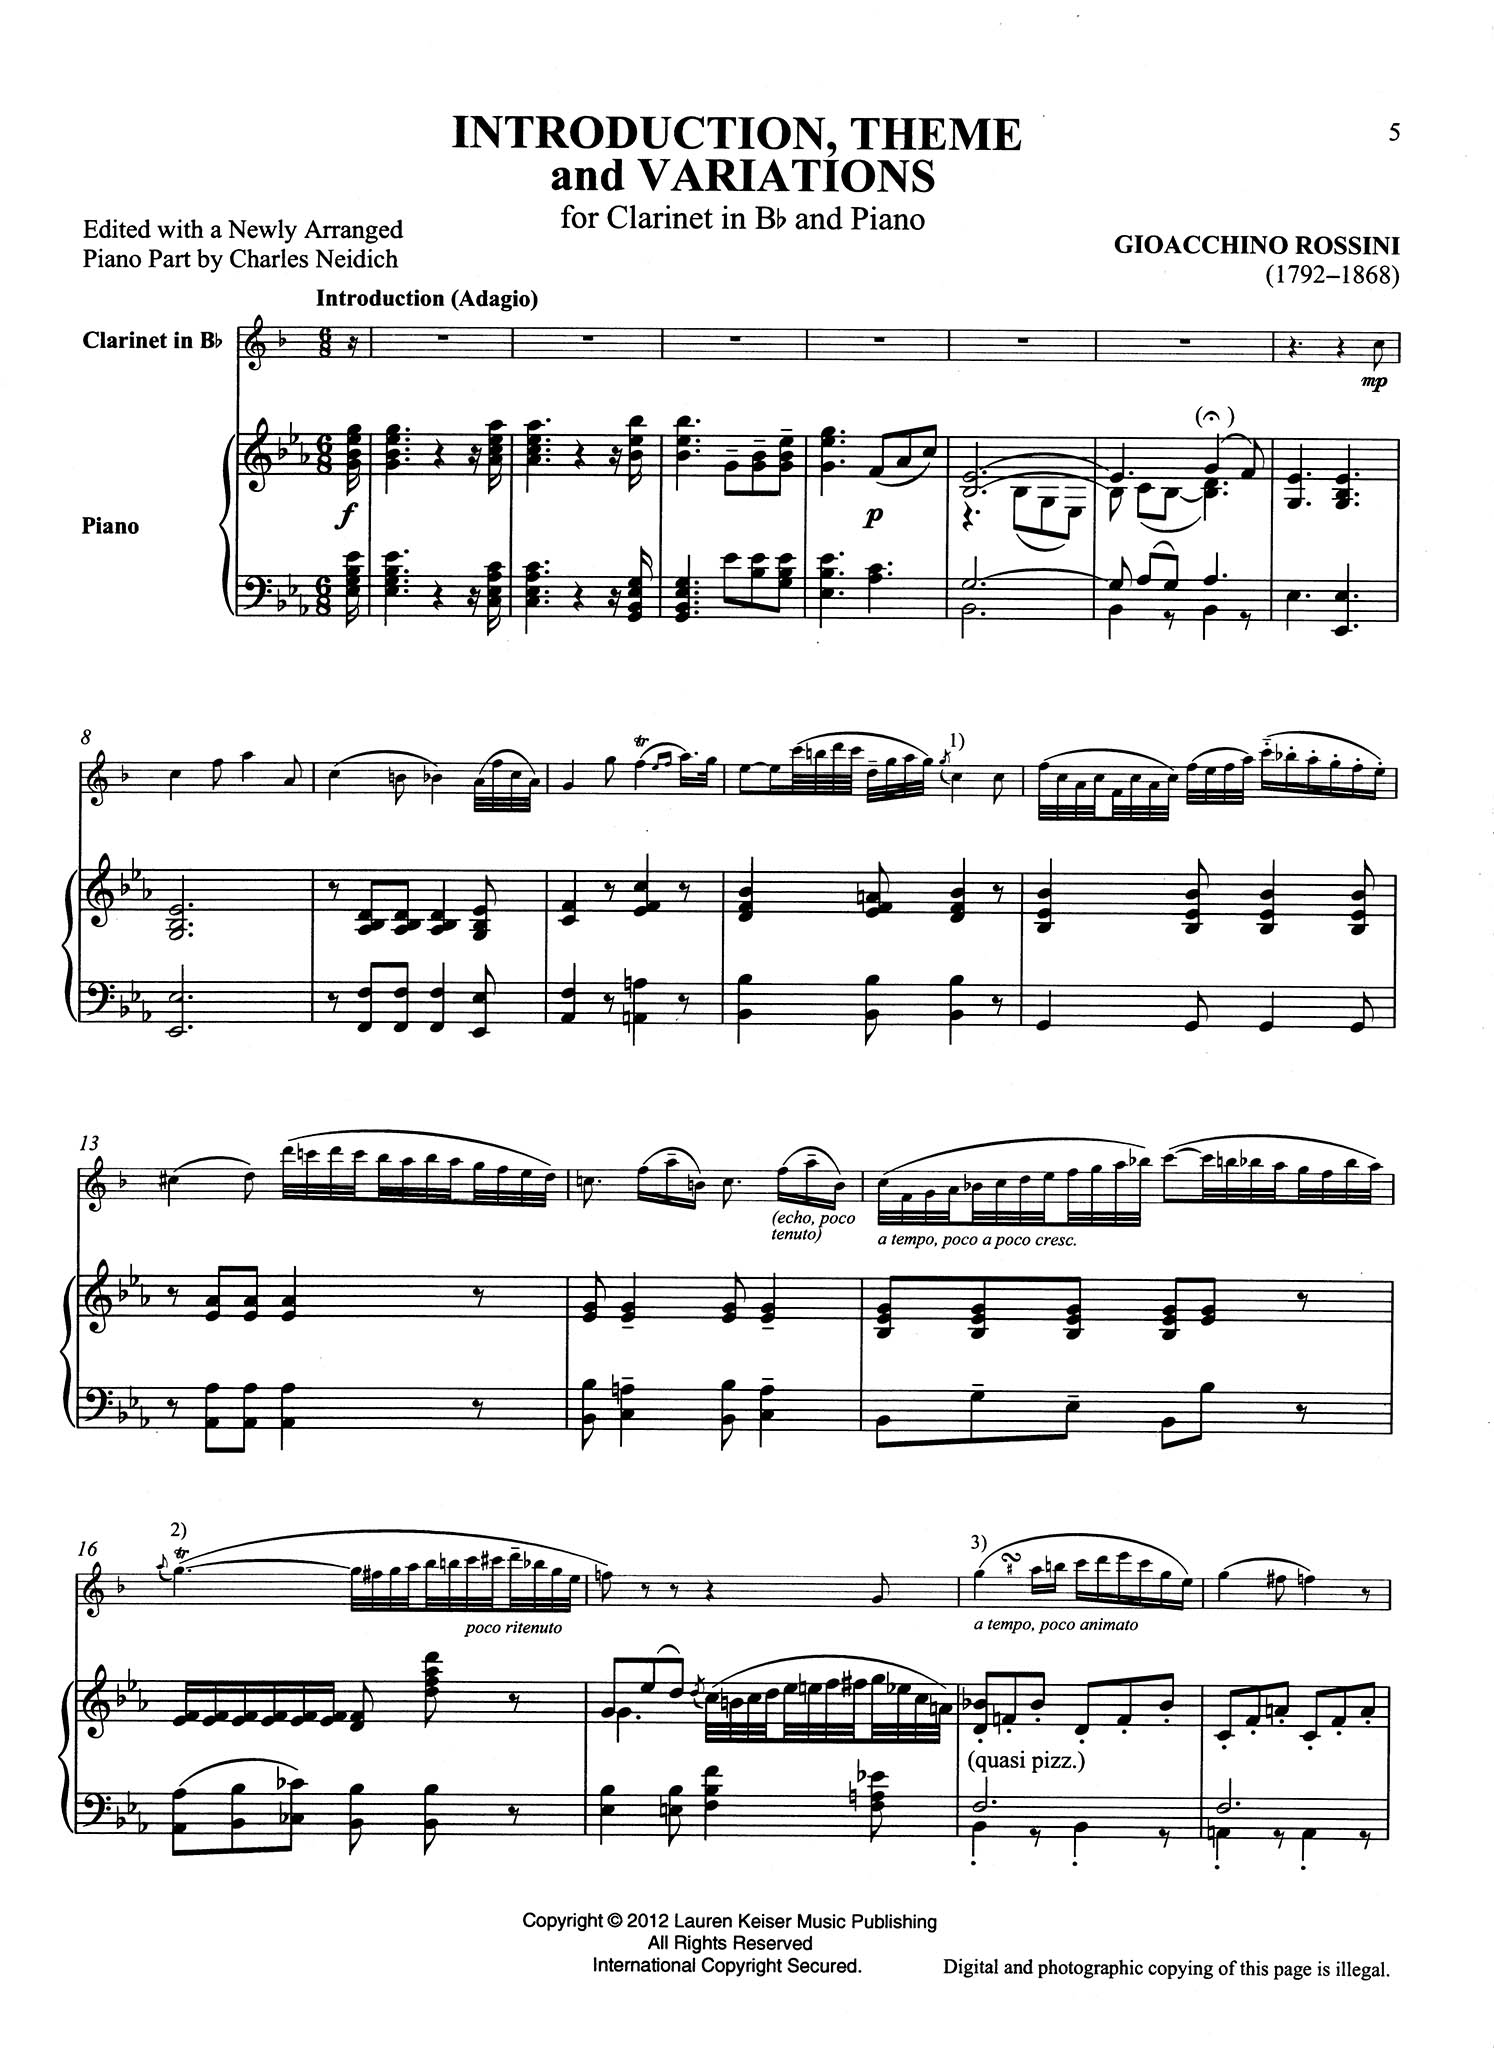 Introduction, Theme & Variations Score